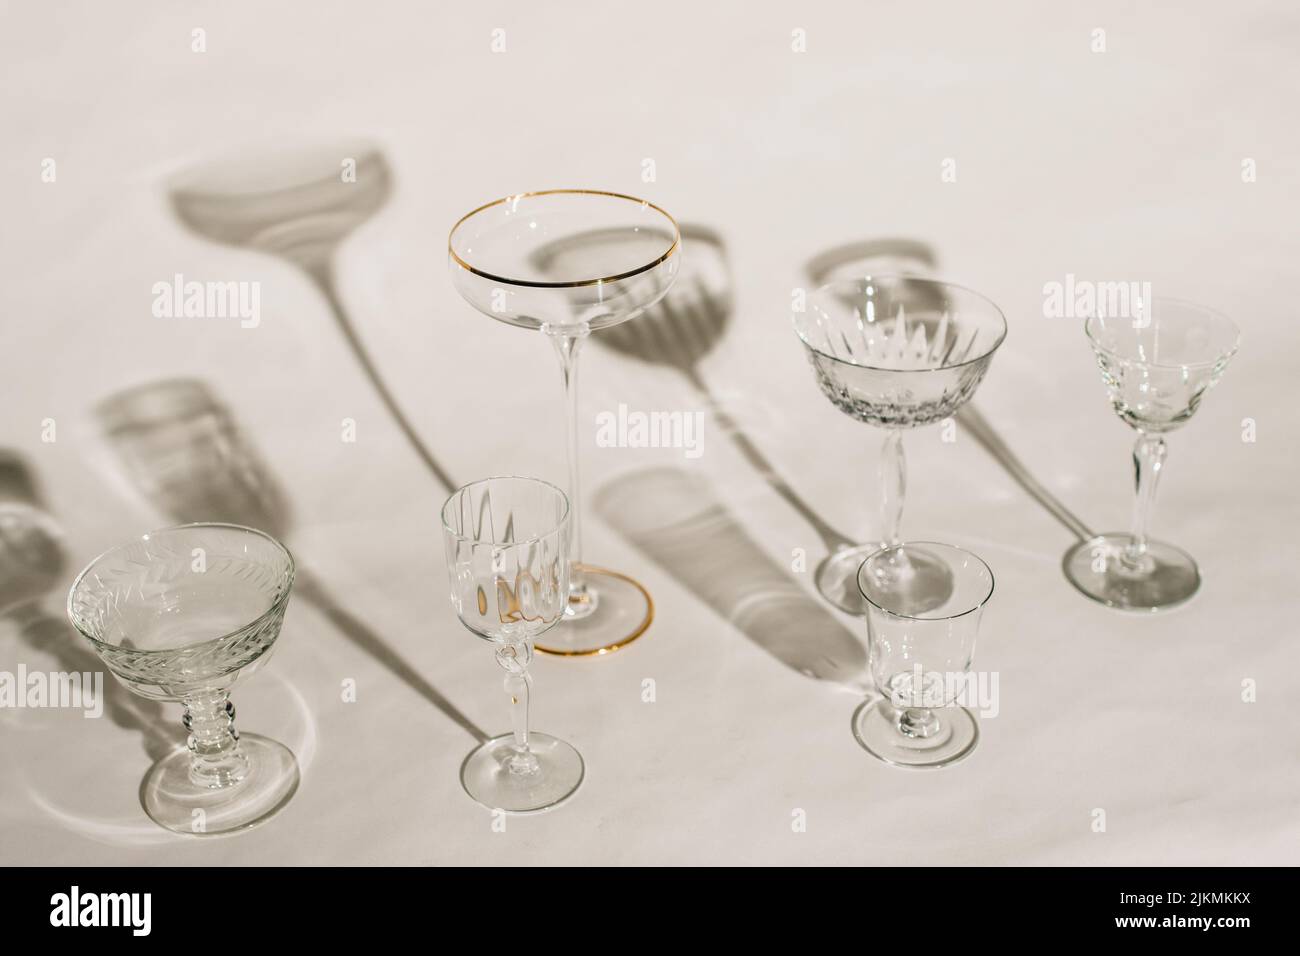 collection of assorted empty cocktail glasses against white background with shadows Stock Photo